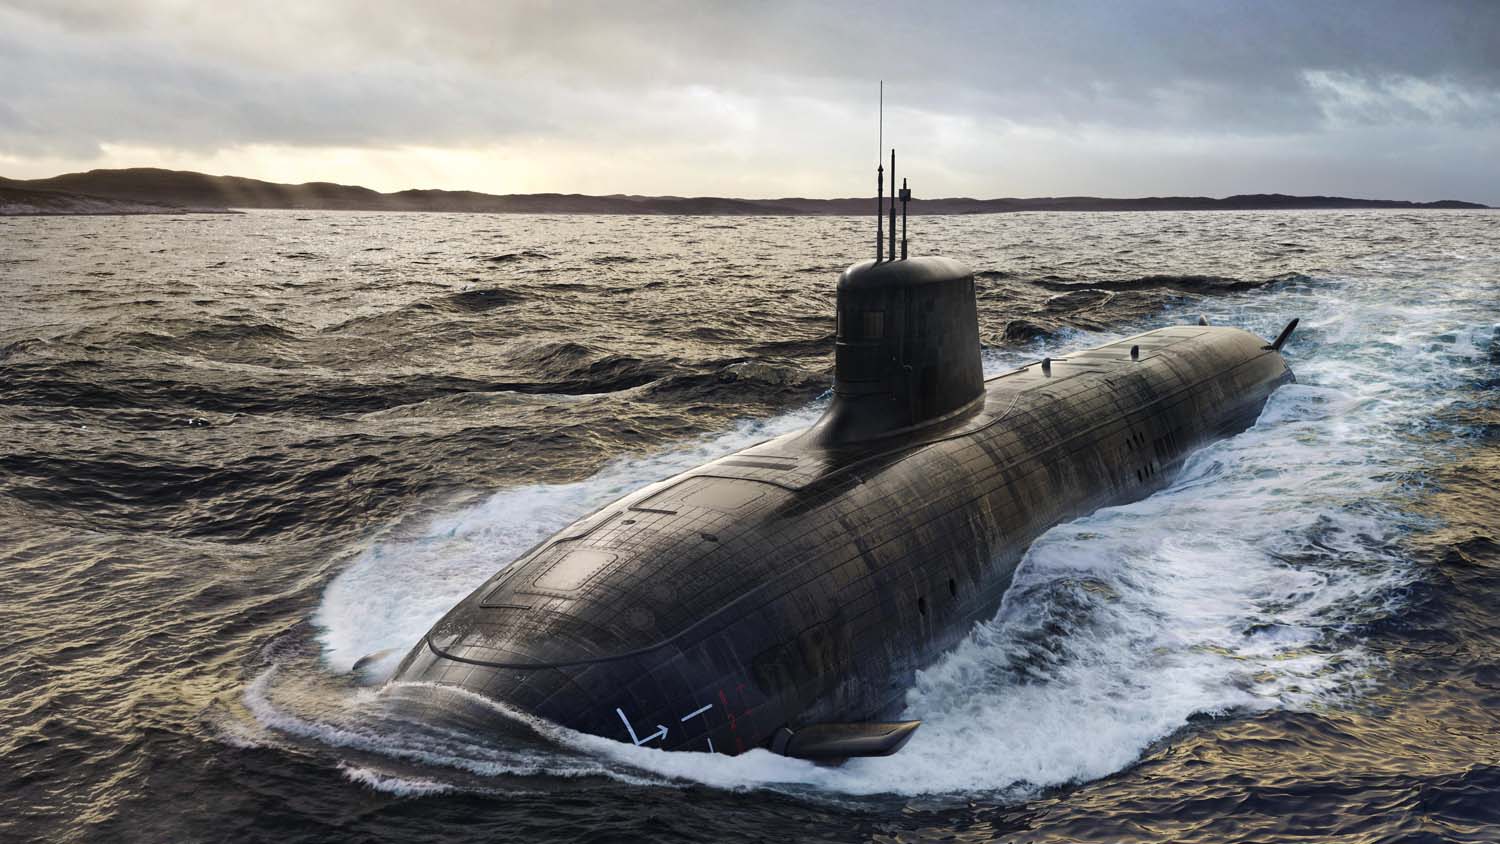 Artist's rendering of SSN-AUKUS submarine (BAE Systems/OGL)